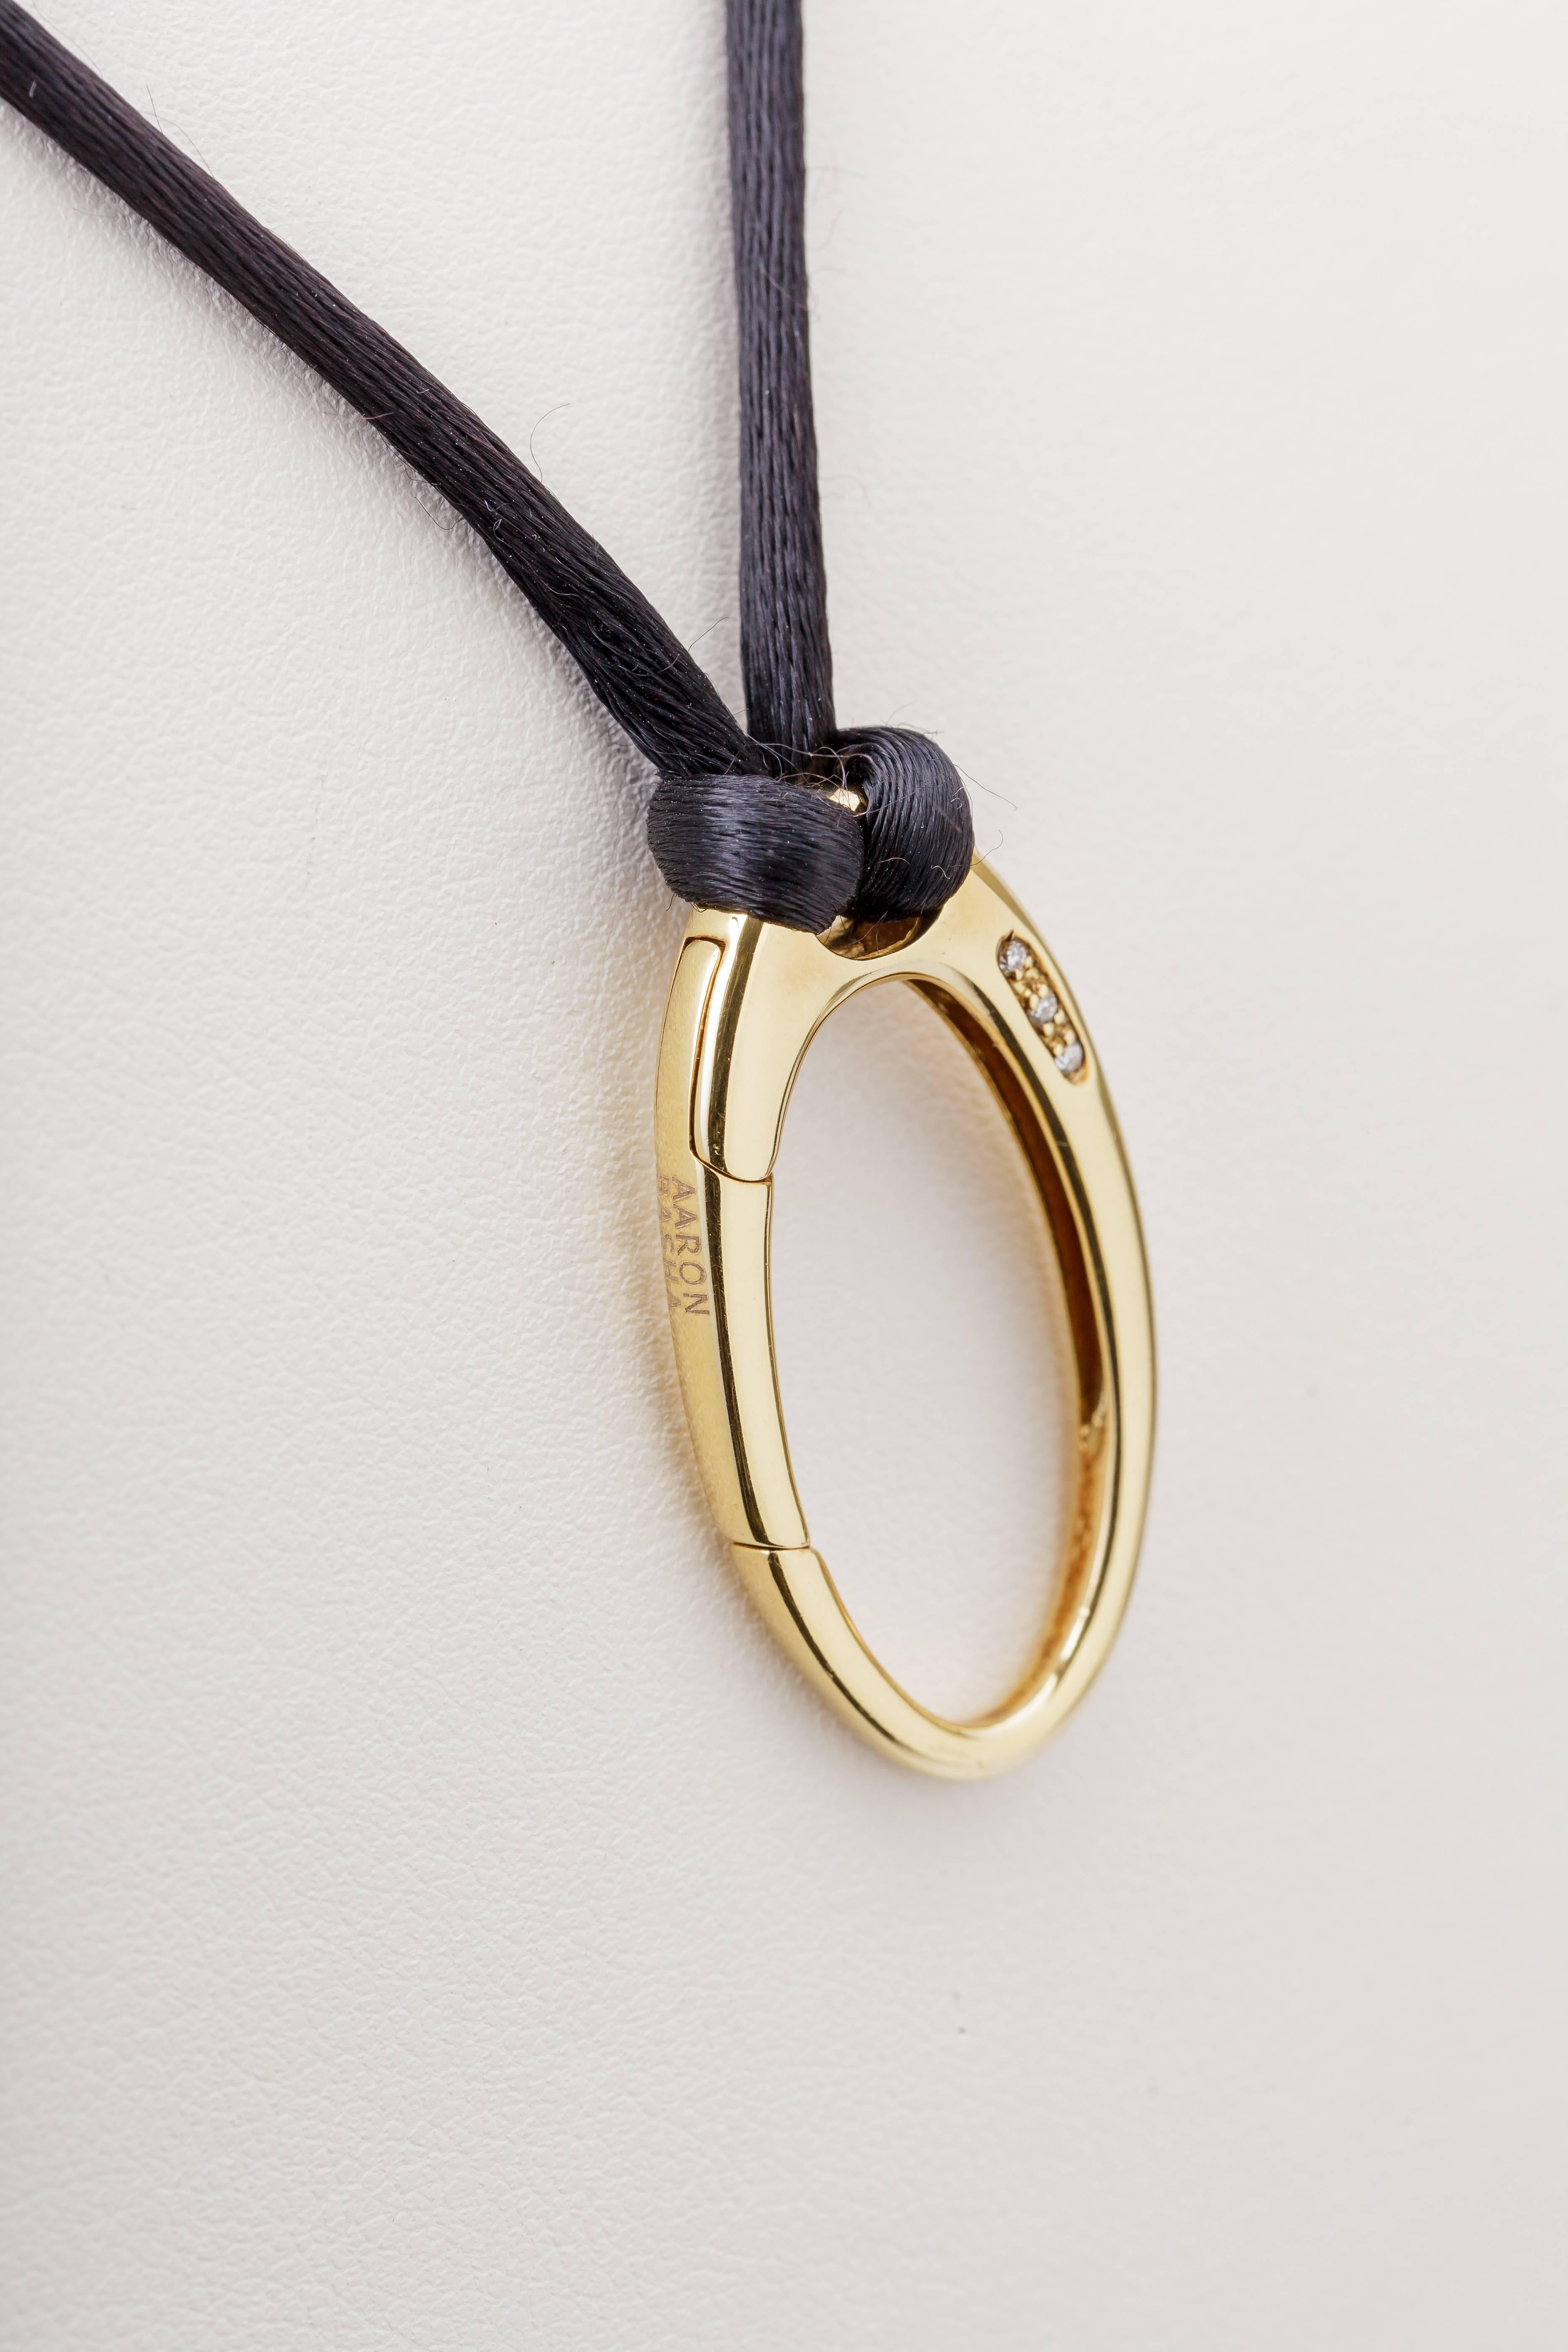 This Aaron Basha oval pendant clasp is 18k yellow gold and is set with three diamonds totaling 0.04ct.  It is on a black cord with an 18k lobster clasp.